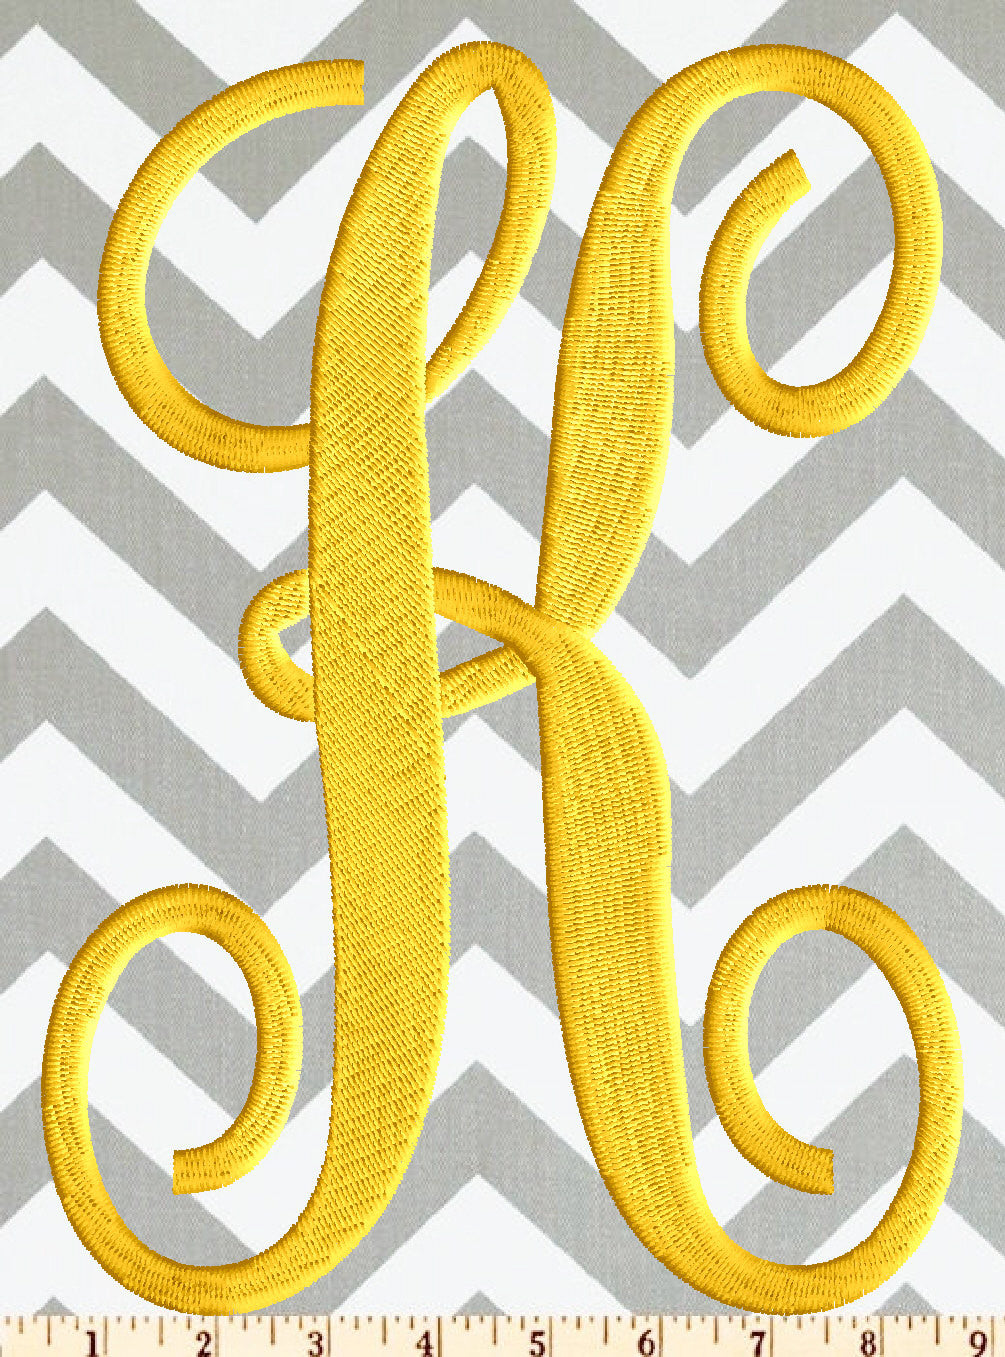 Large 4 inch tall Scripty Monogram Font Embroidery File - 26 Letters - EMBROIDERY DESIGN FILE Instant download Dst Exp Vp3 Pes format